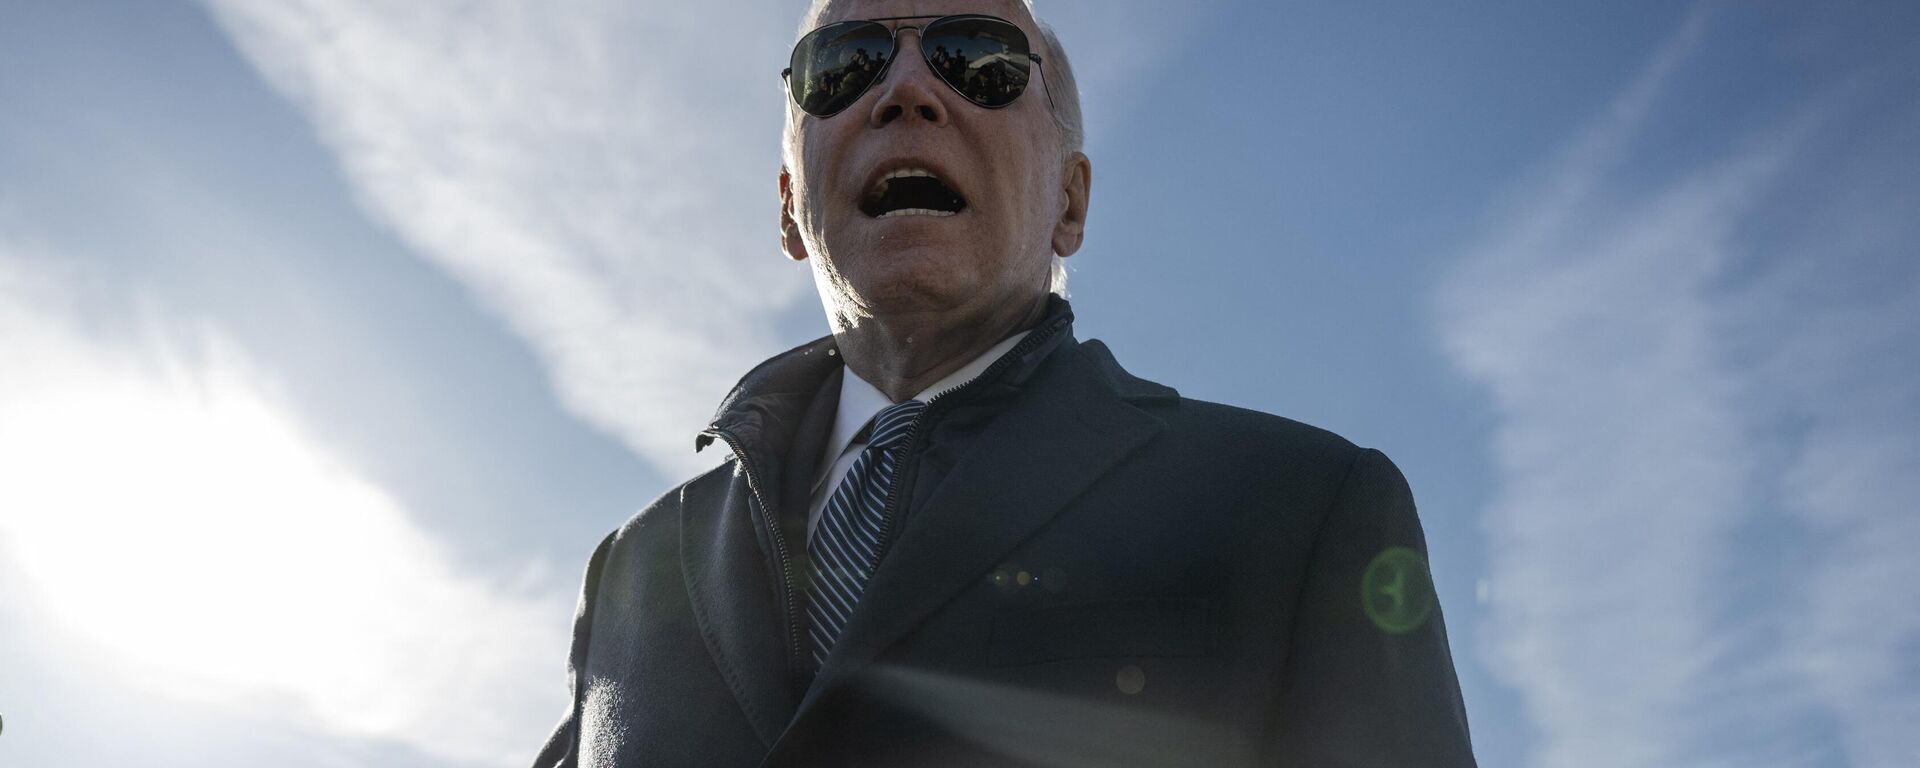 US President Joe Biden speaks to the press after arriving at Hagerstown Regional Airport in Hagerstown, Maryland, on February 4, 2023. - Sputnik India, 1920, 15.02.2023